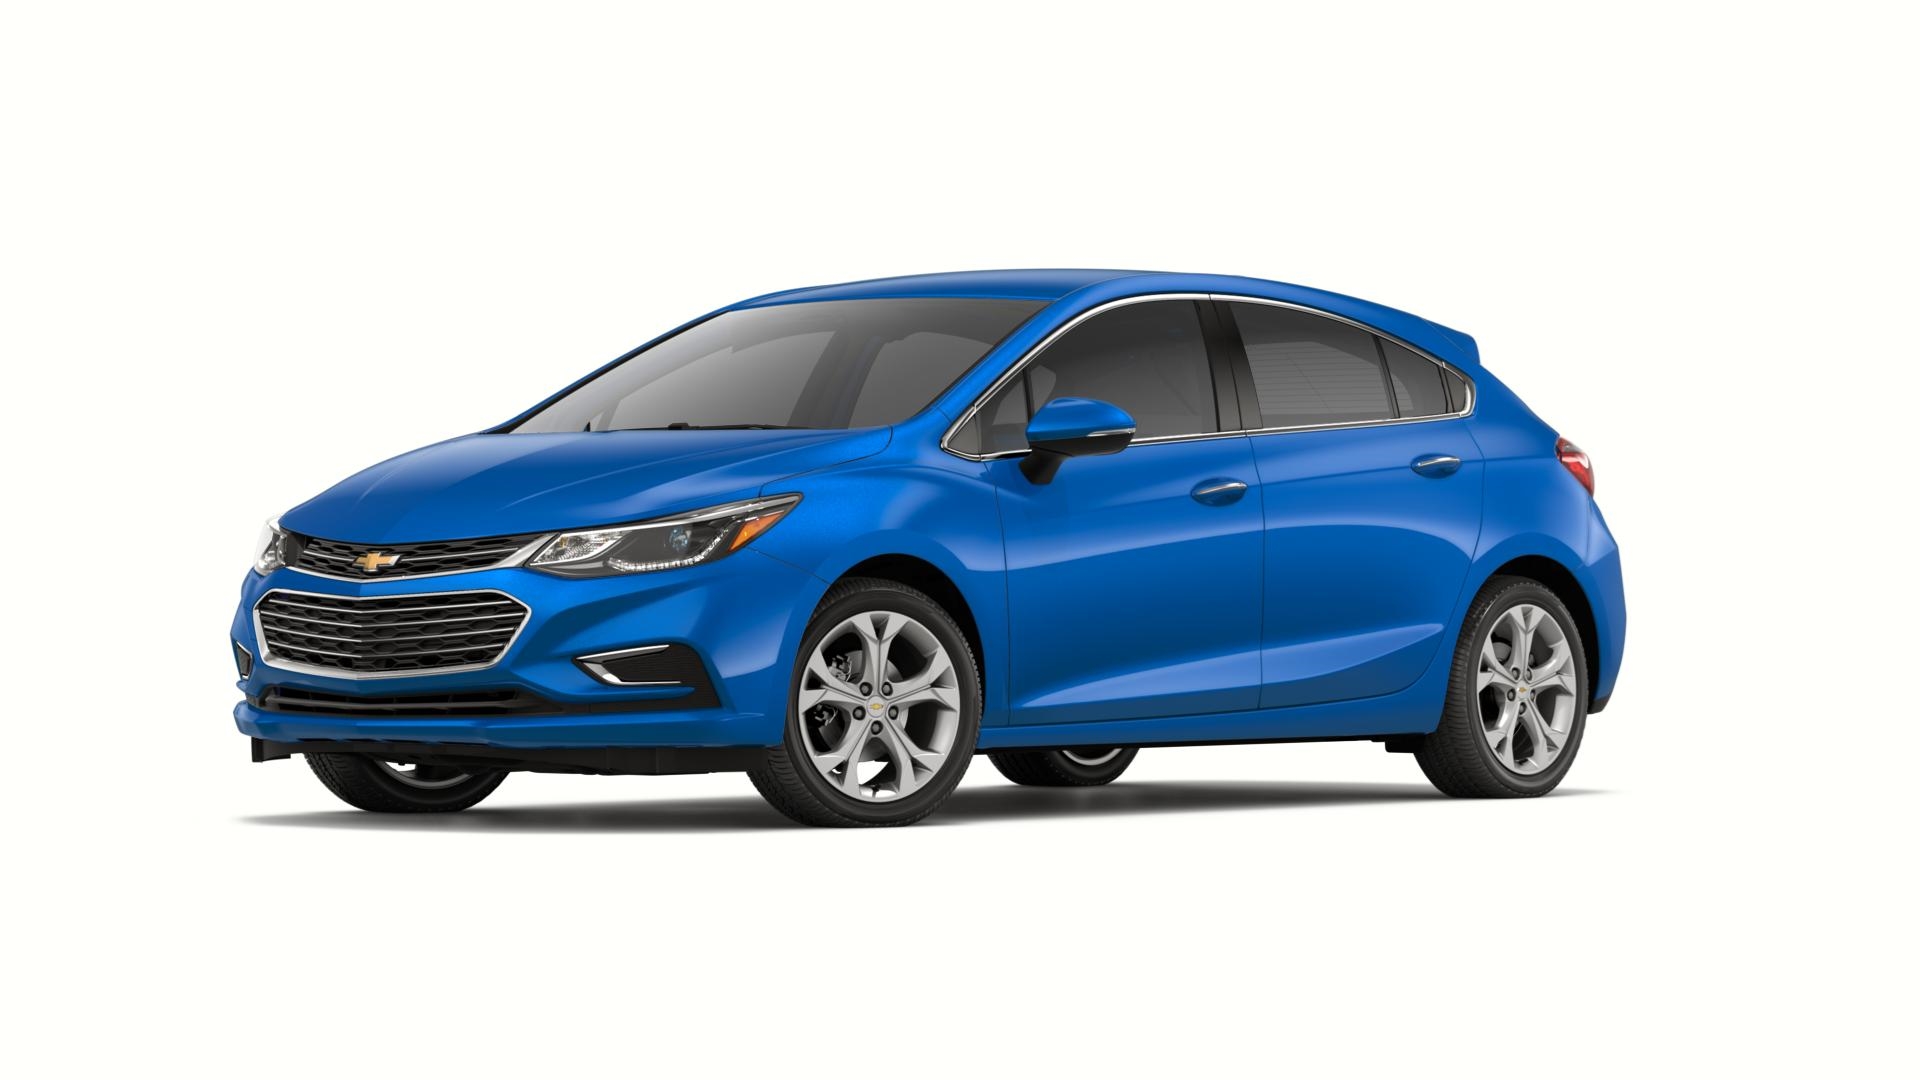 2018 Chevrolet Cruze Premier Hatchback Full Specs, Features and Price ...